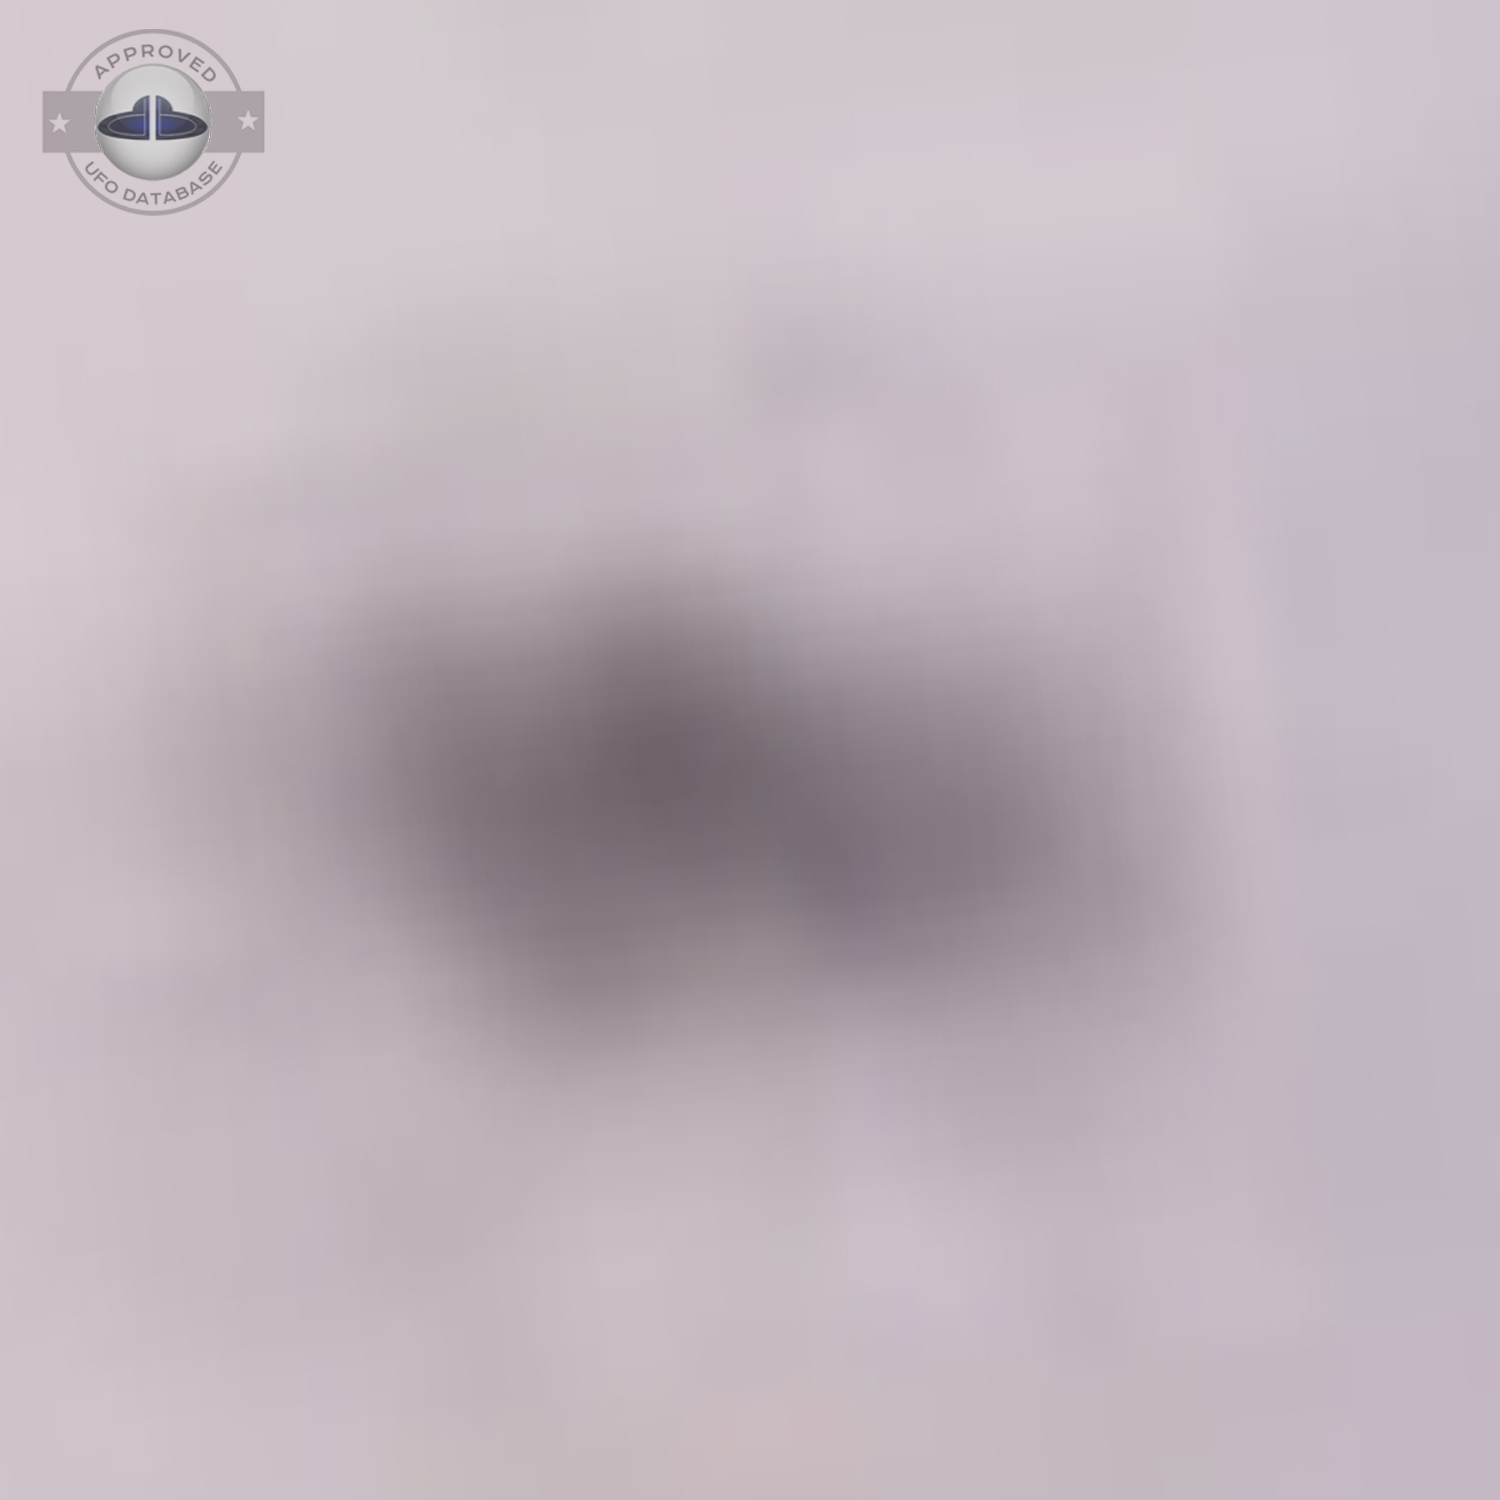 UFO flying over pasture with lama and horse in grey cloudy sky UFO Picture #19-5